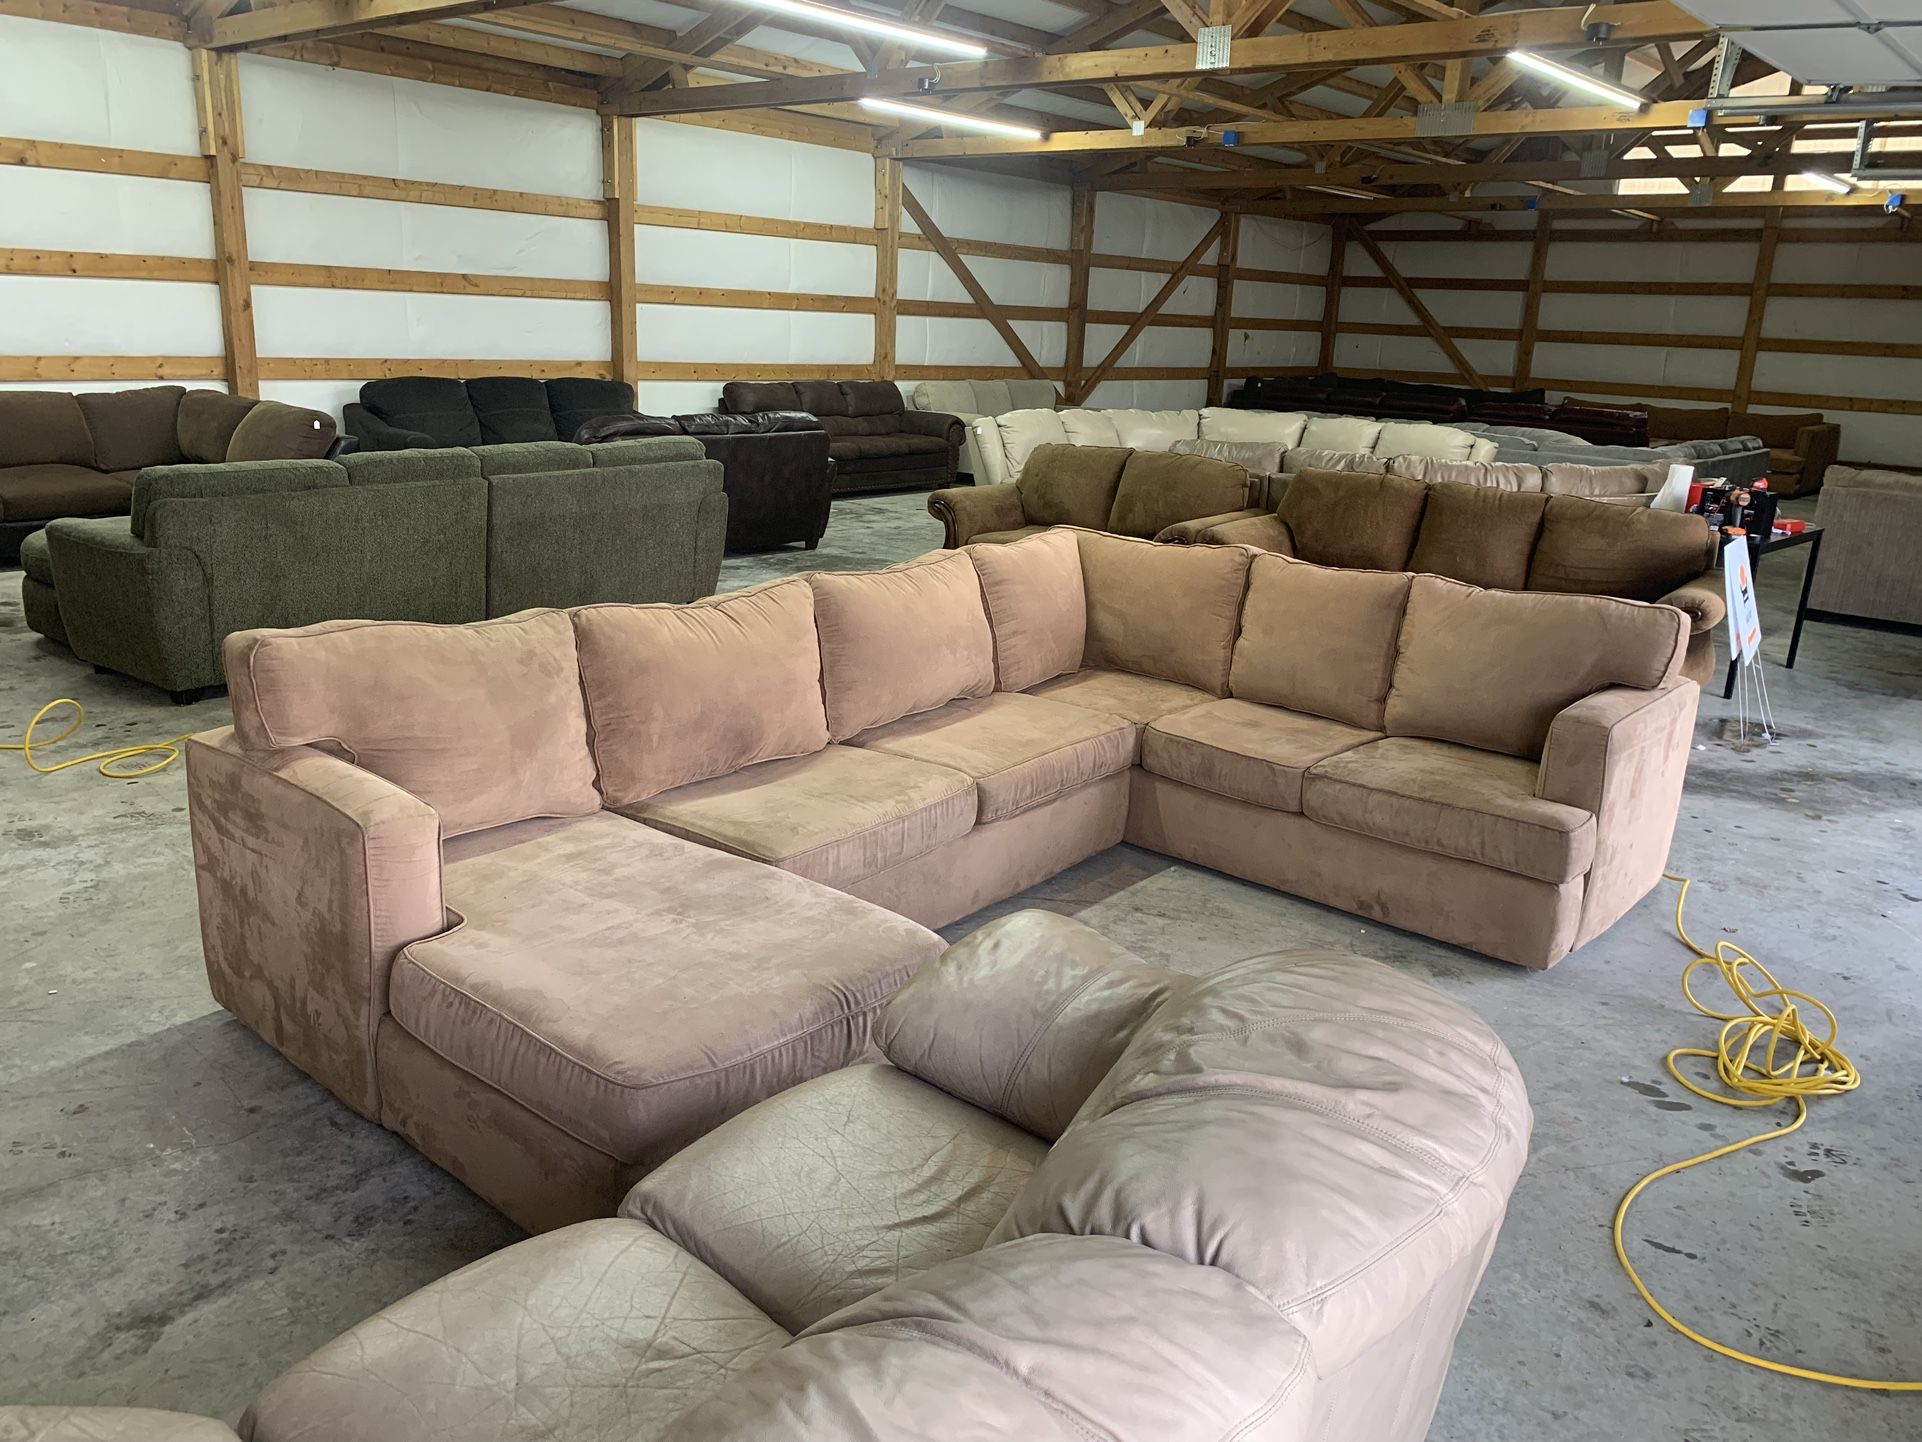 Biege Wrap Around Sectional Couch “WE DELIVER”